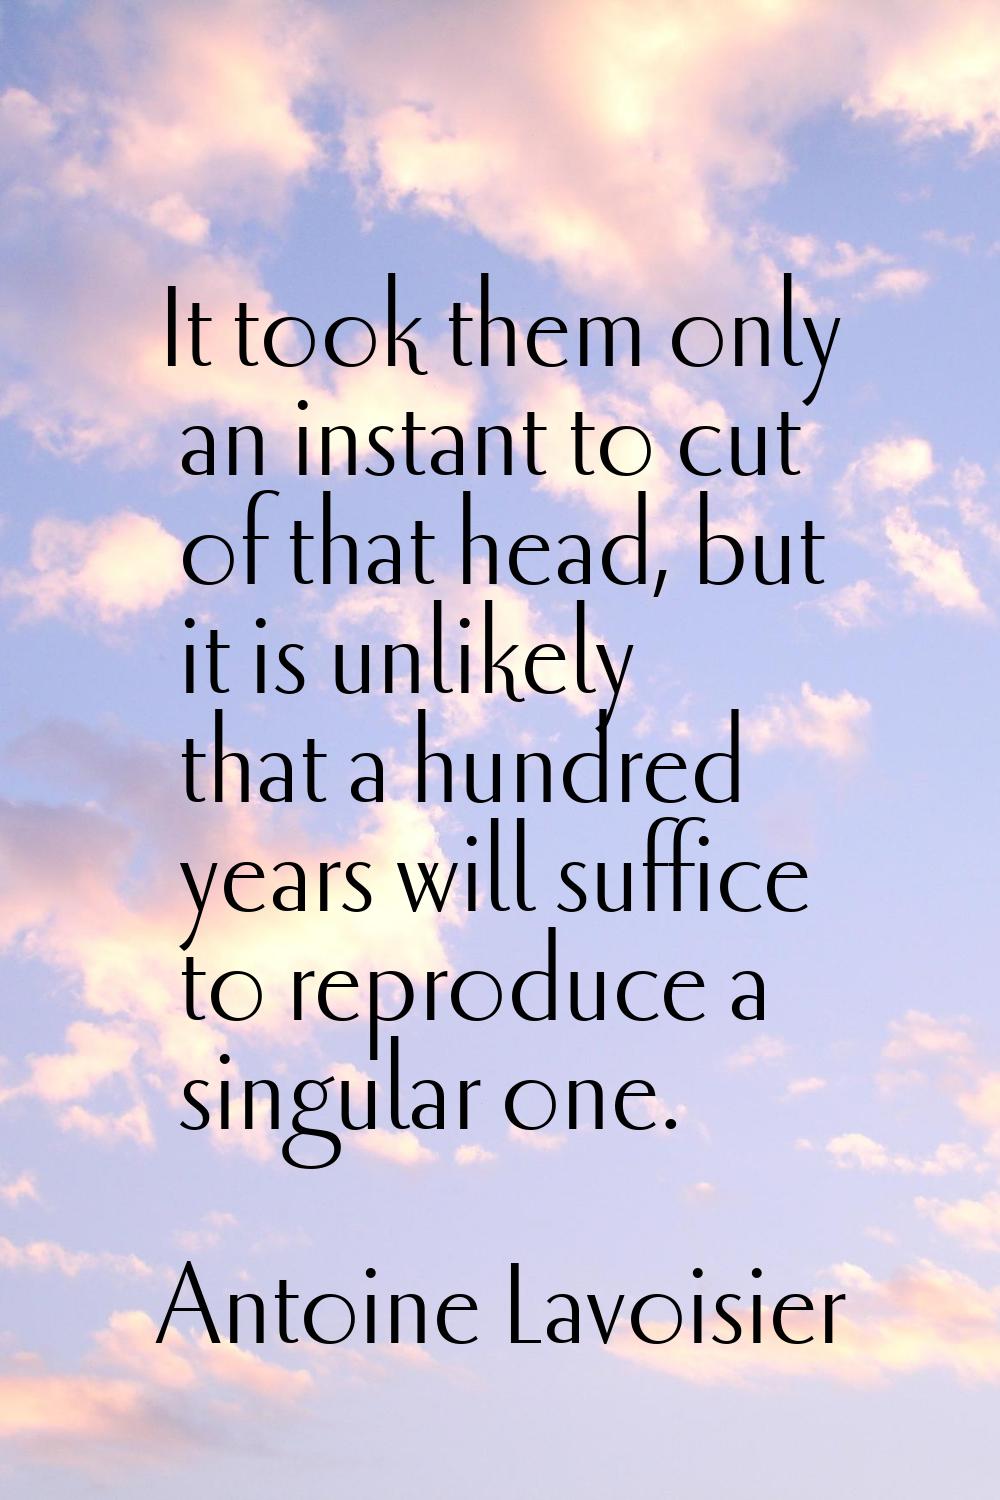 It took them only an instant to cut of that head, but it is unlikely that a hundred years will suff